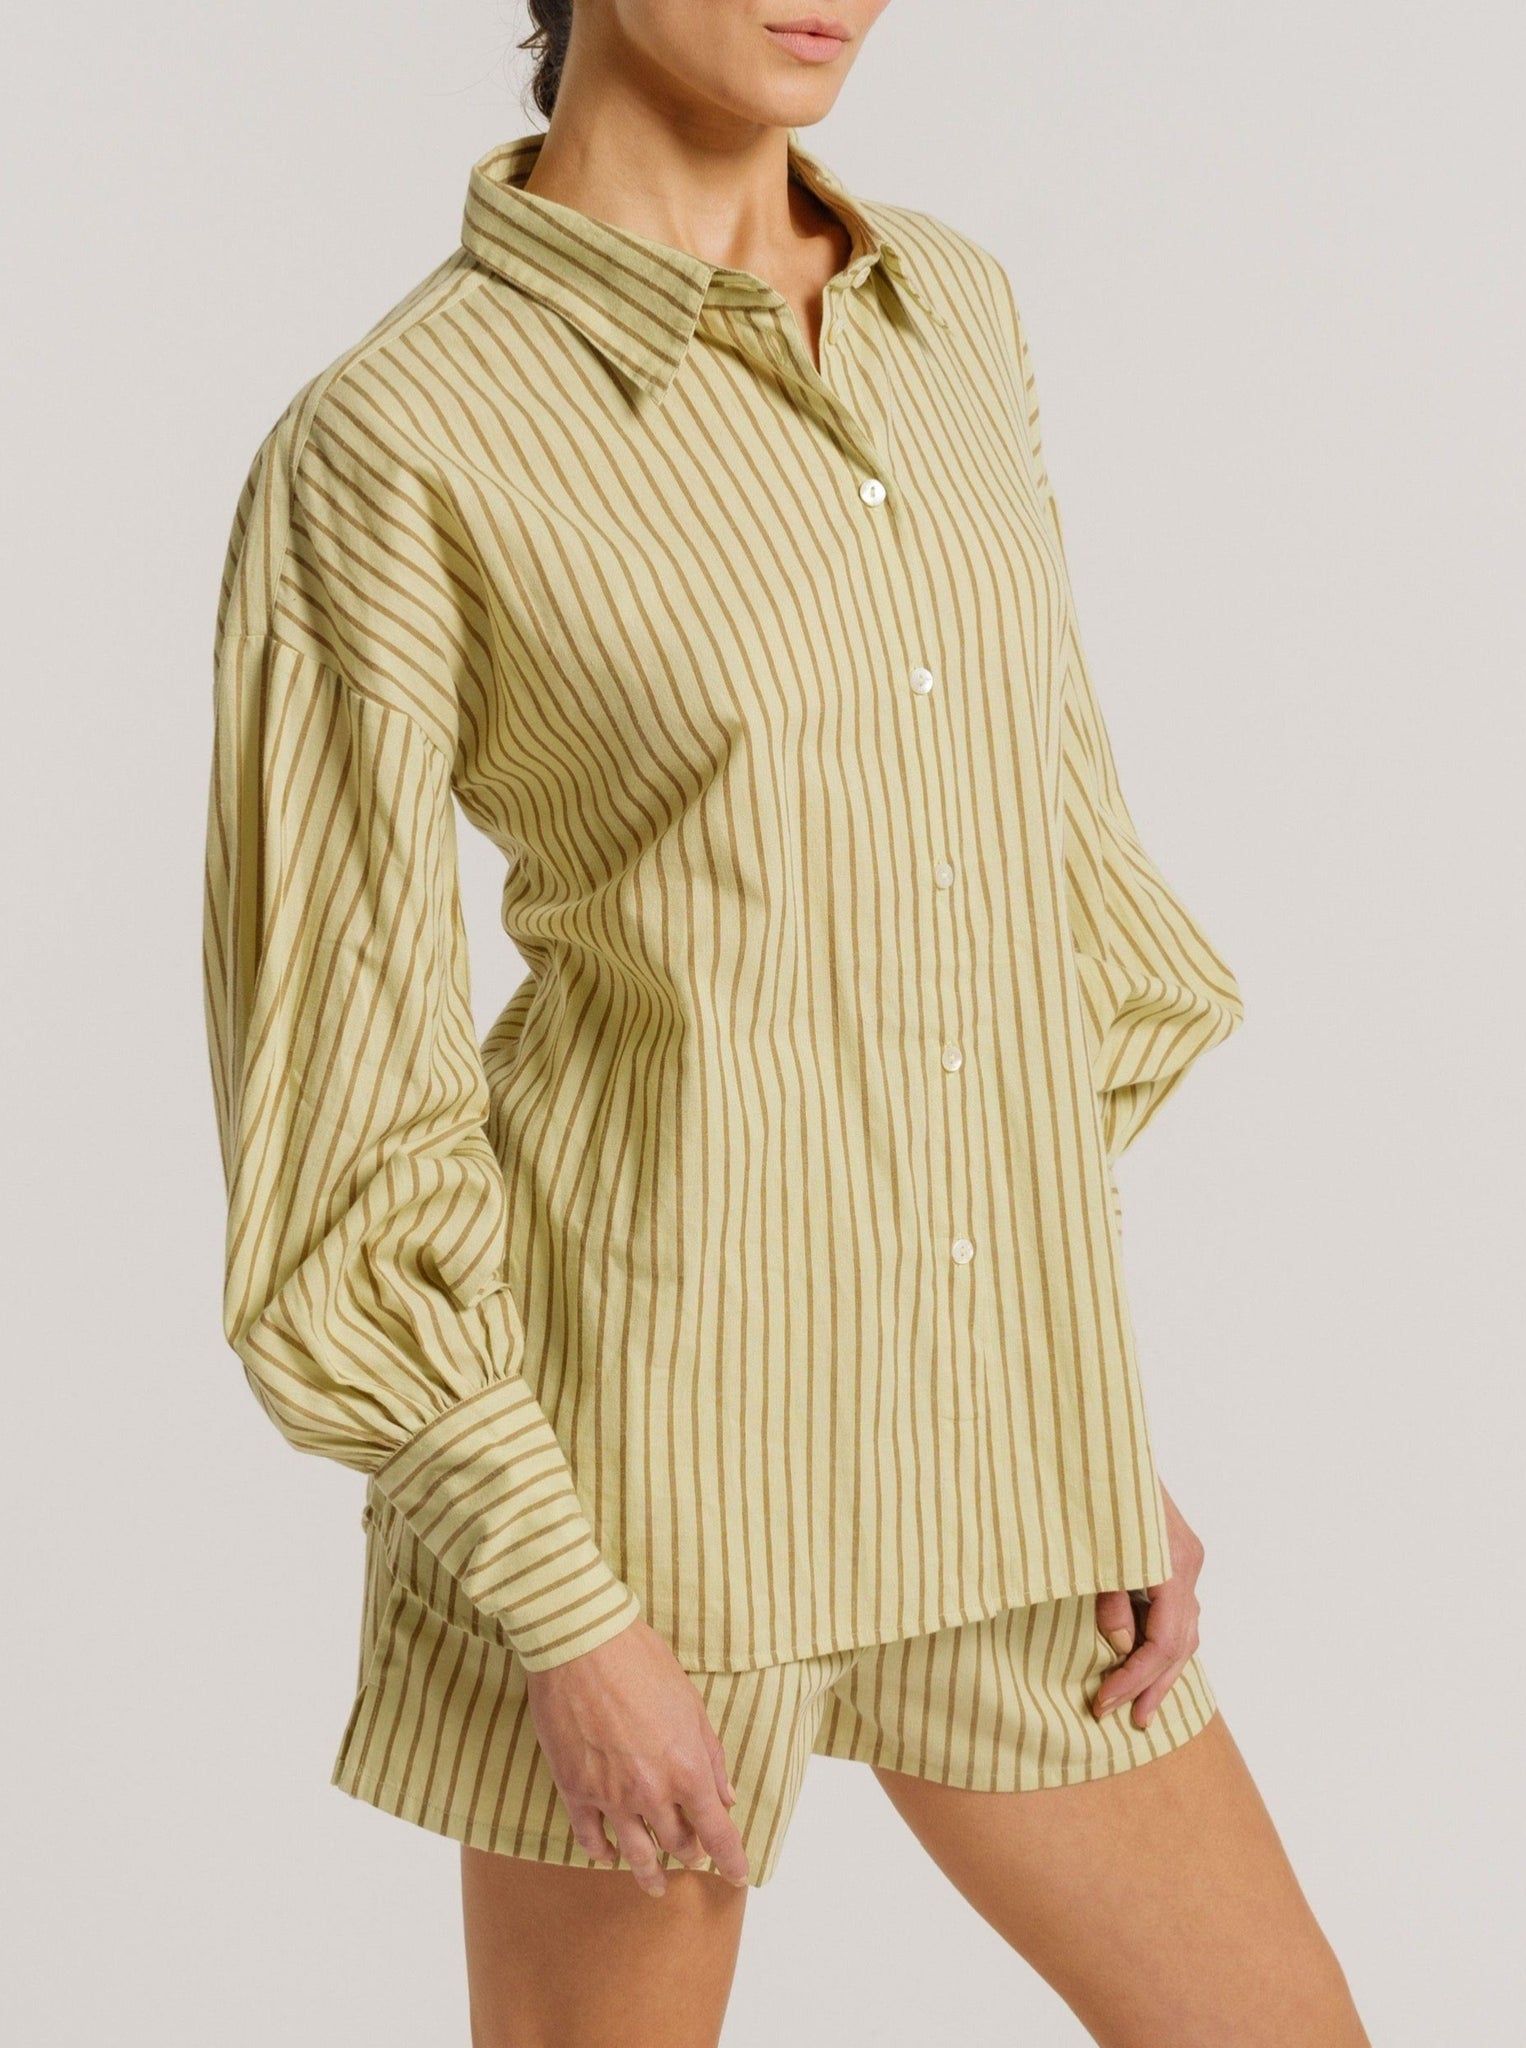 The model is wearing a Museo Button Up - Feather Grass Stripe shirt and shorts made from organic cotton.